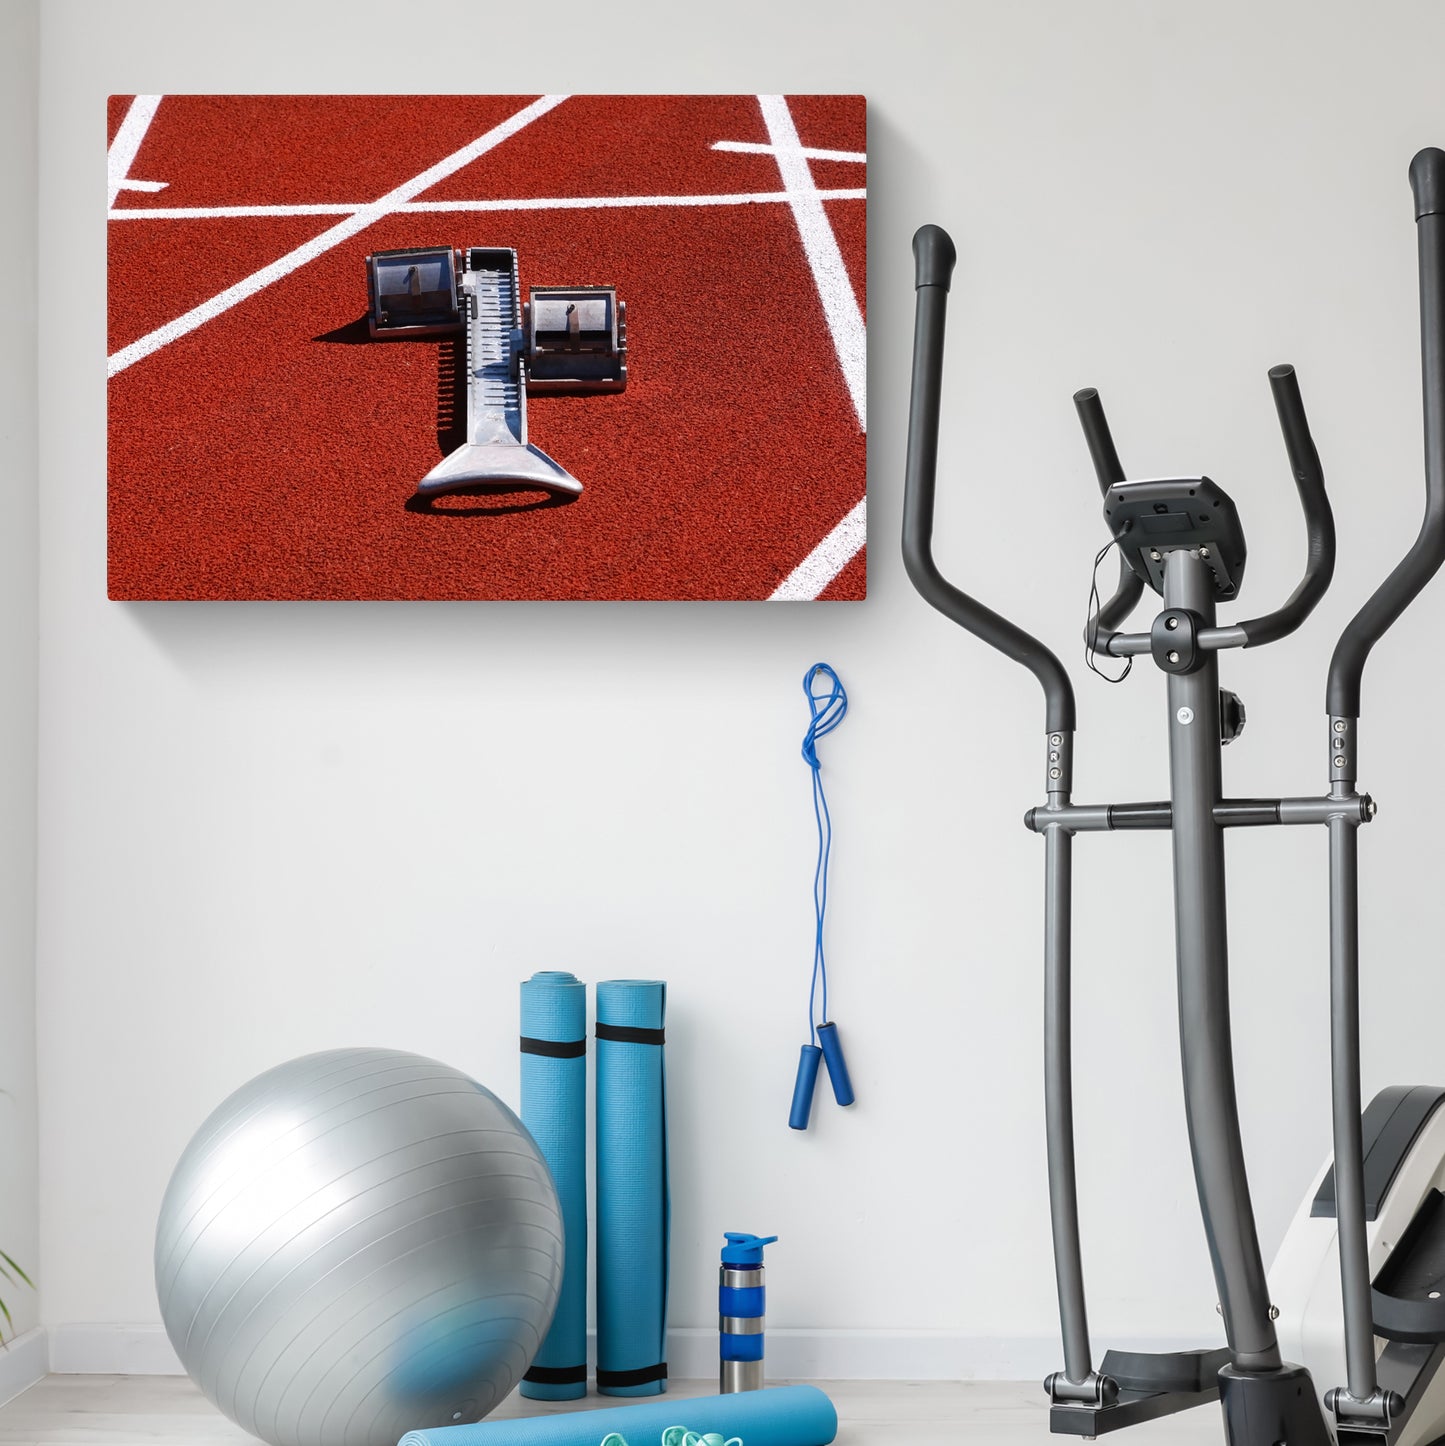 Track and Field Starting Block Devices Canvas Wall Art Style 2 - Image by Tailored Canvases